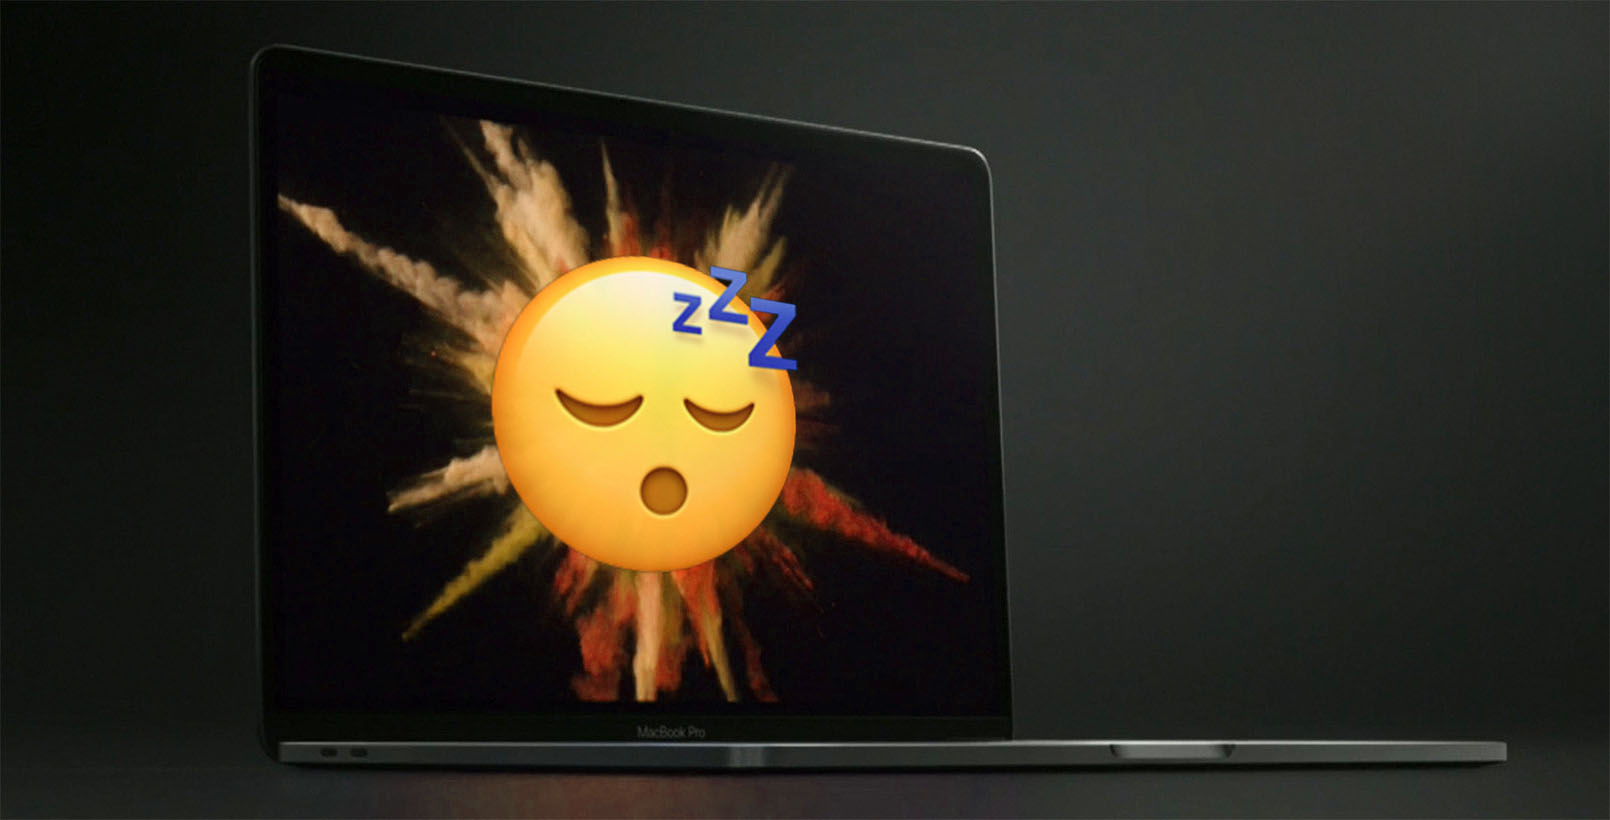 Does Apple's Night Shift Actually Help With Sleep?